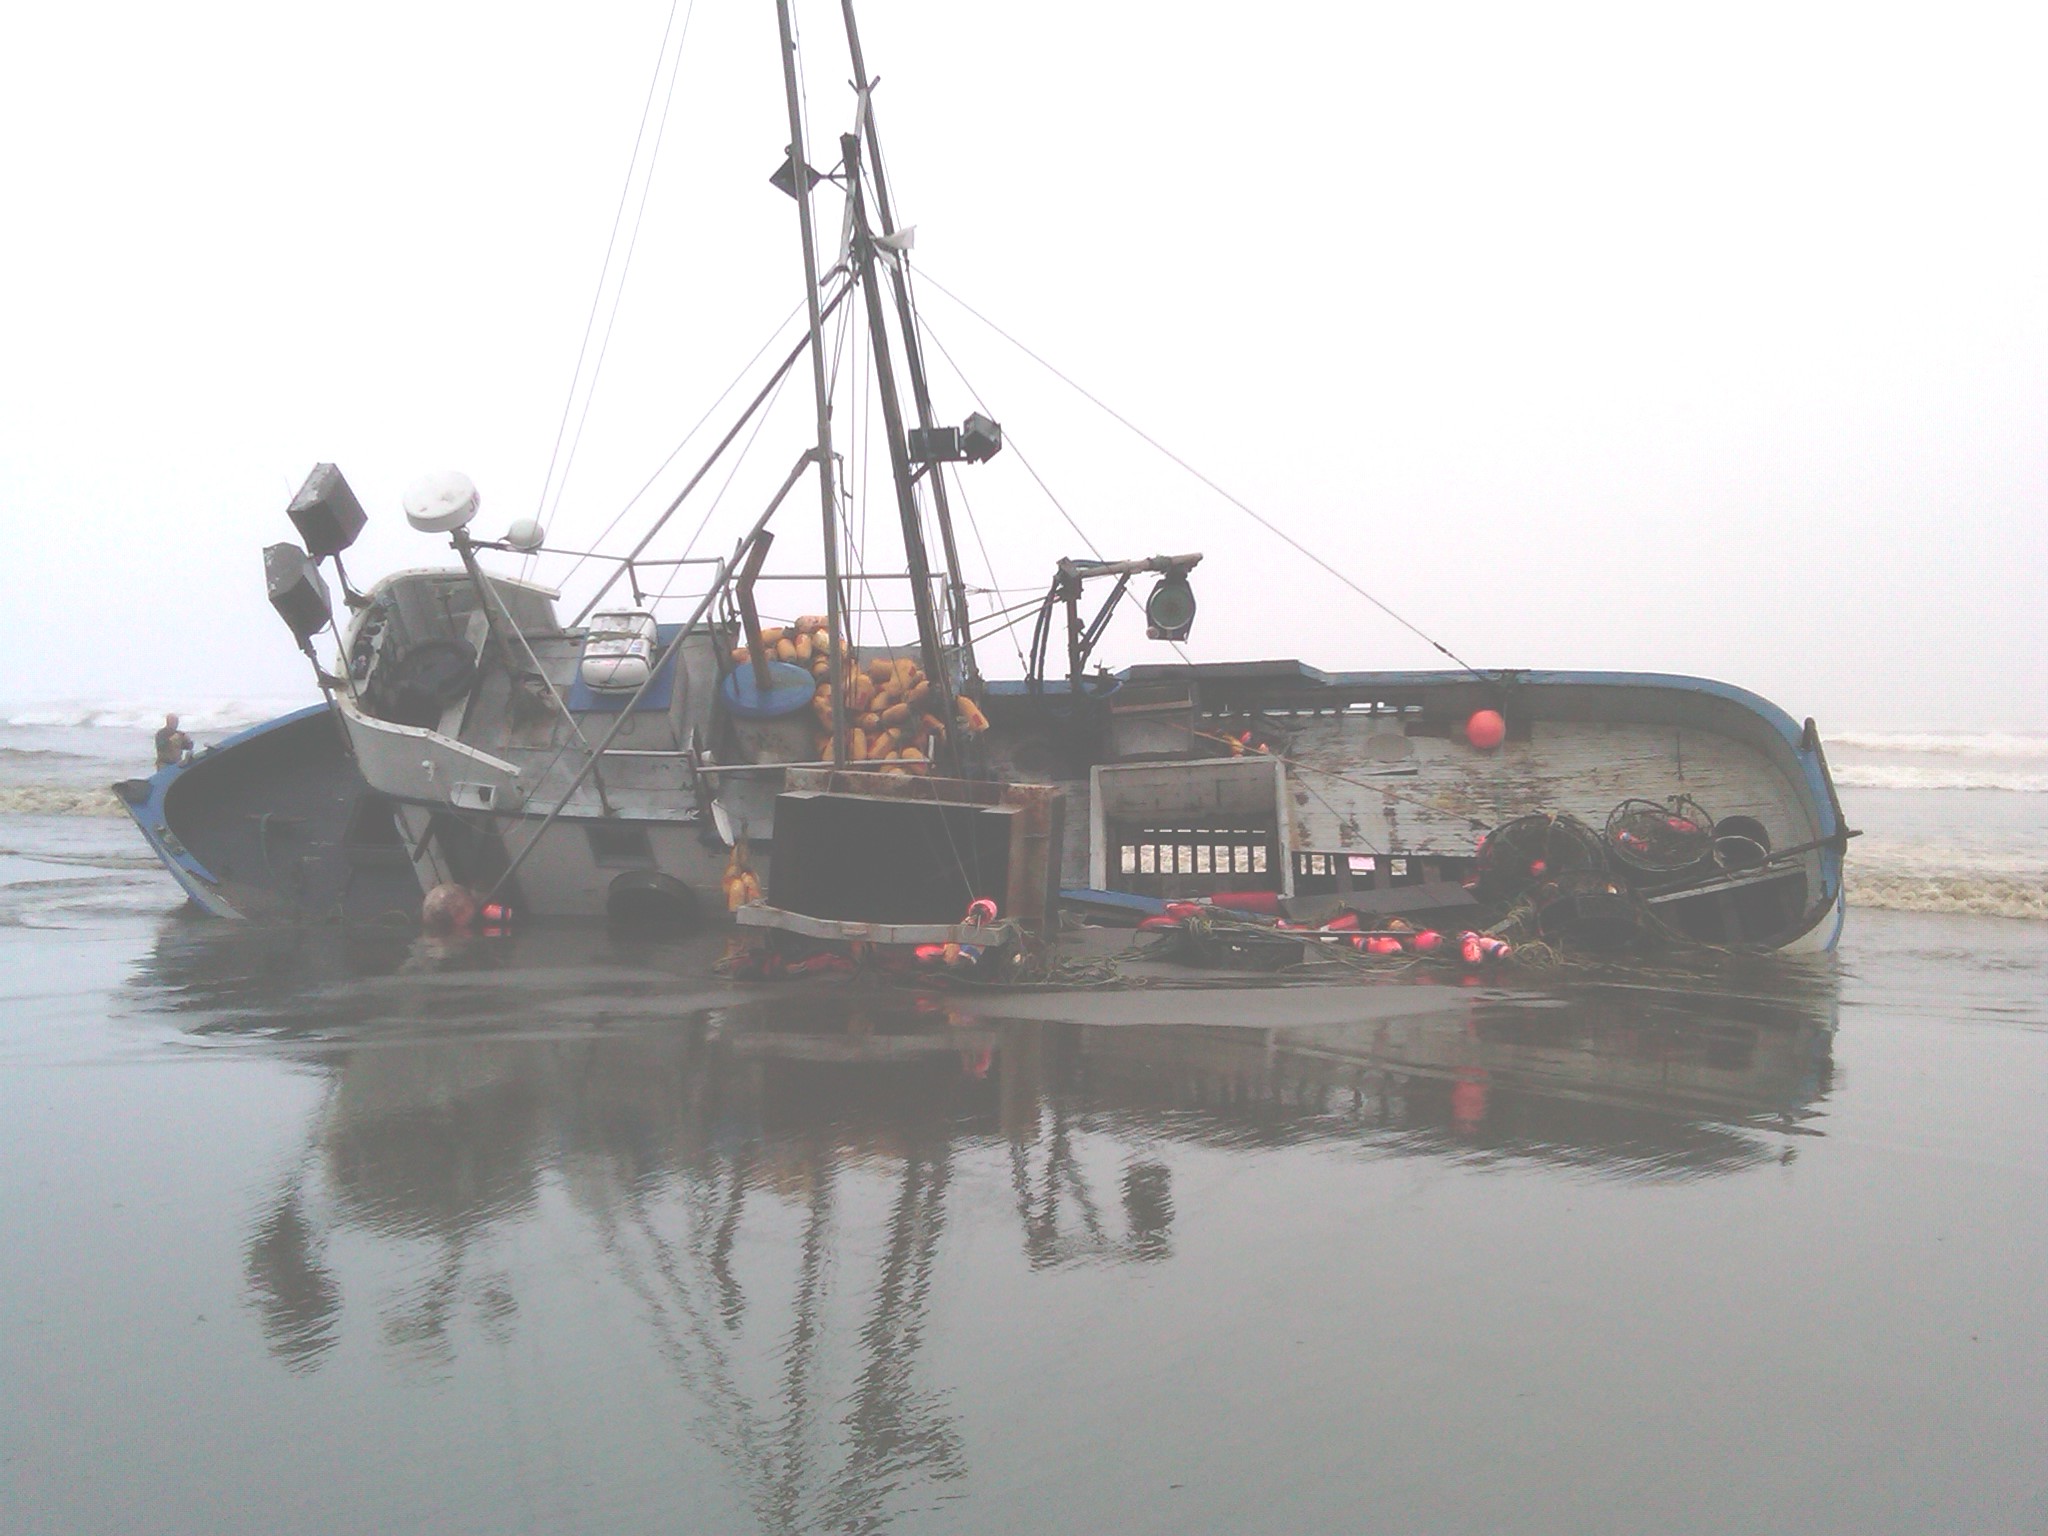 The grounded Fishing Vessel DARE II